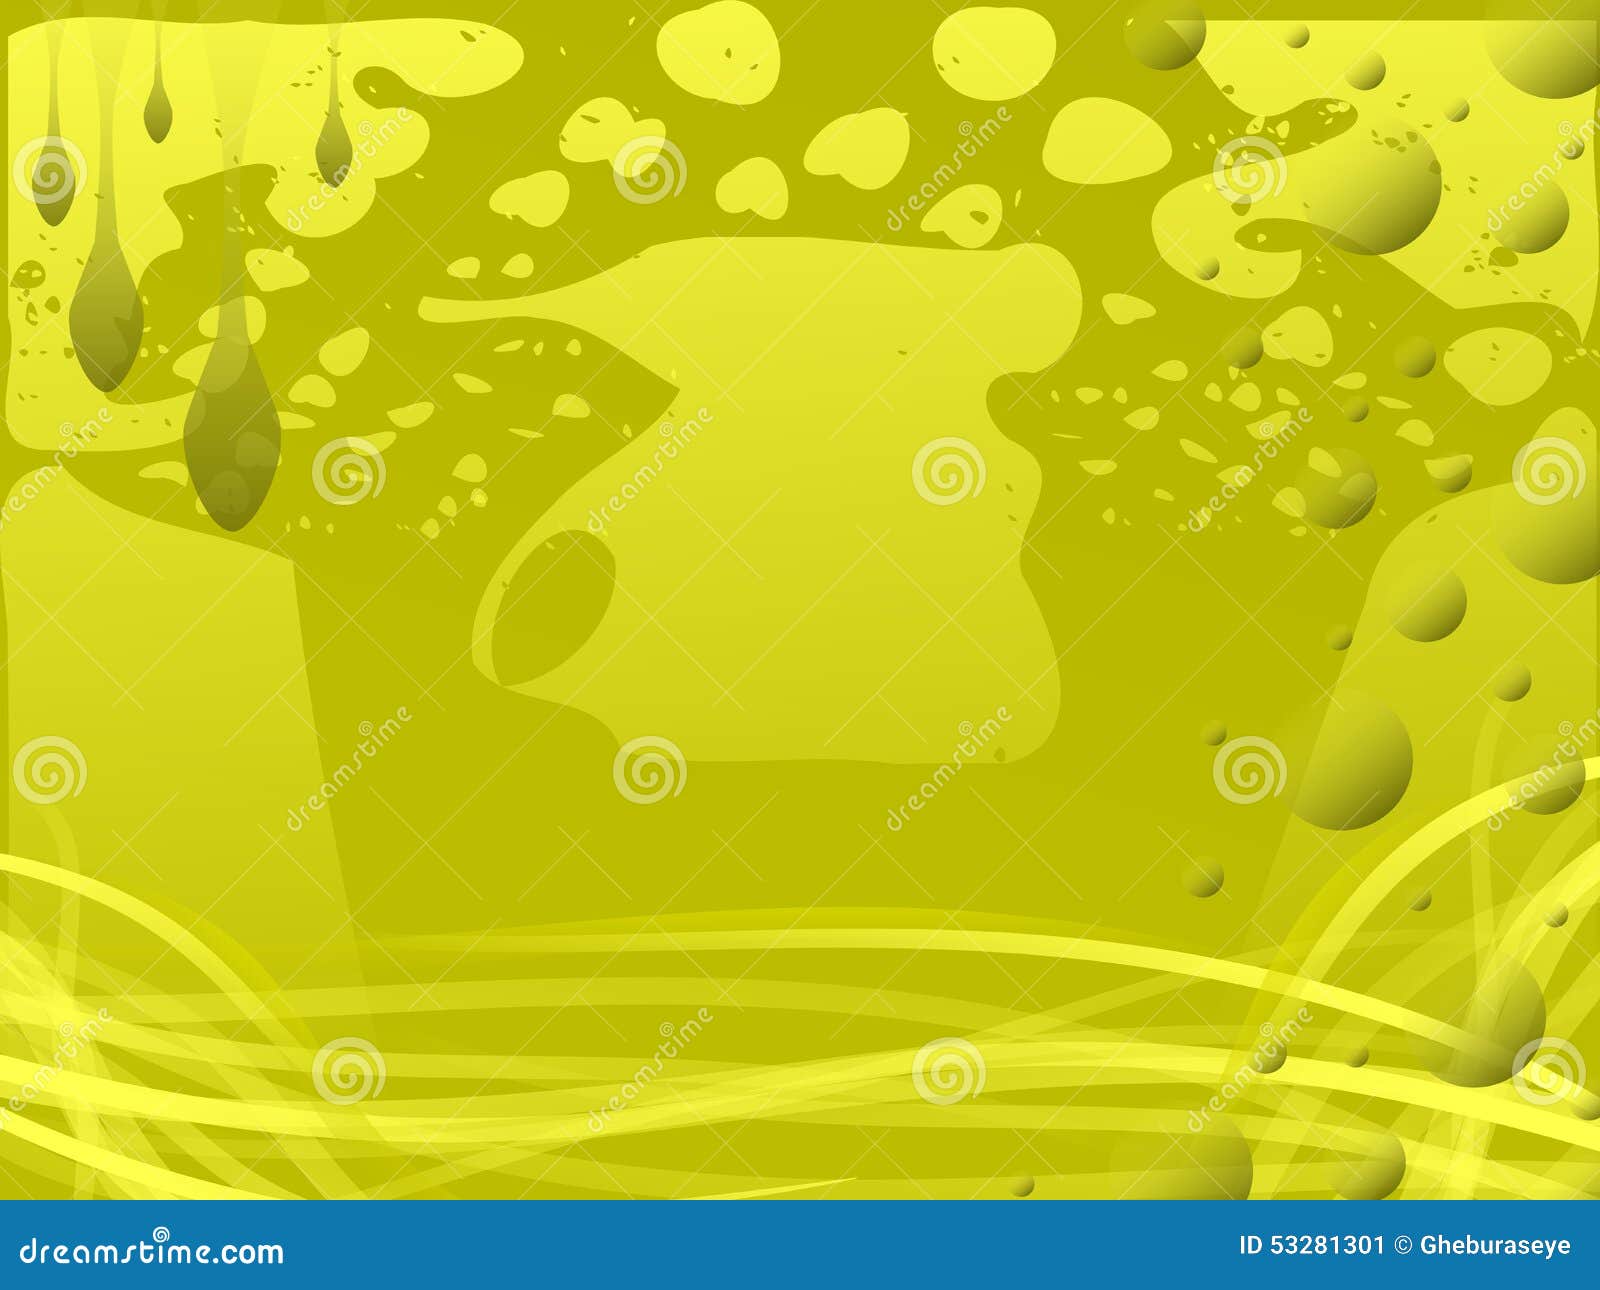 Artistic Original Abstract Colorful Background Stock Illustration ...